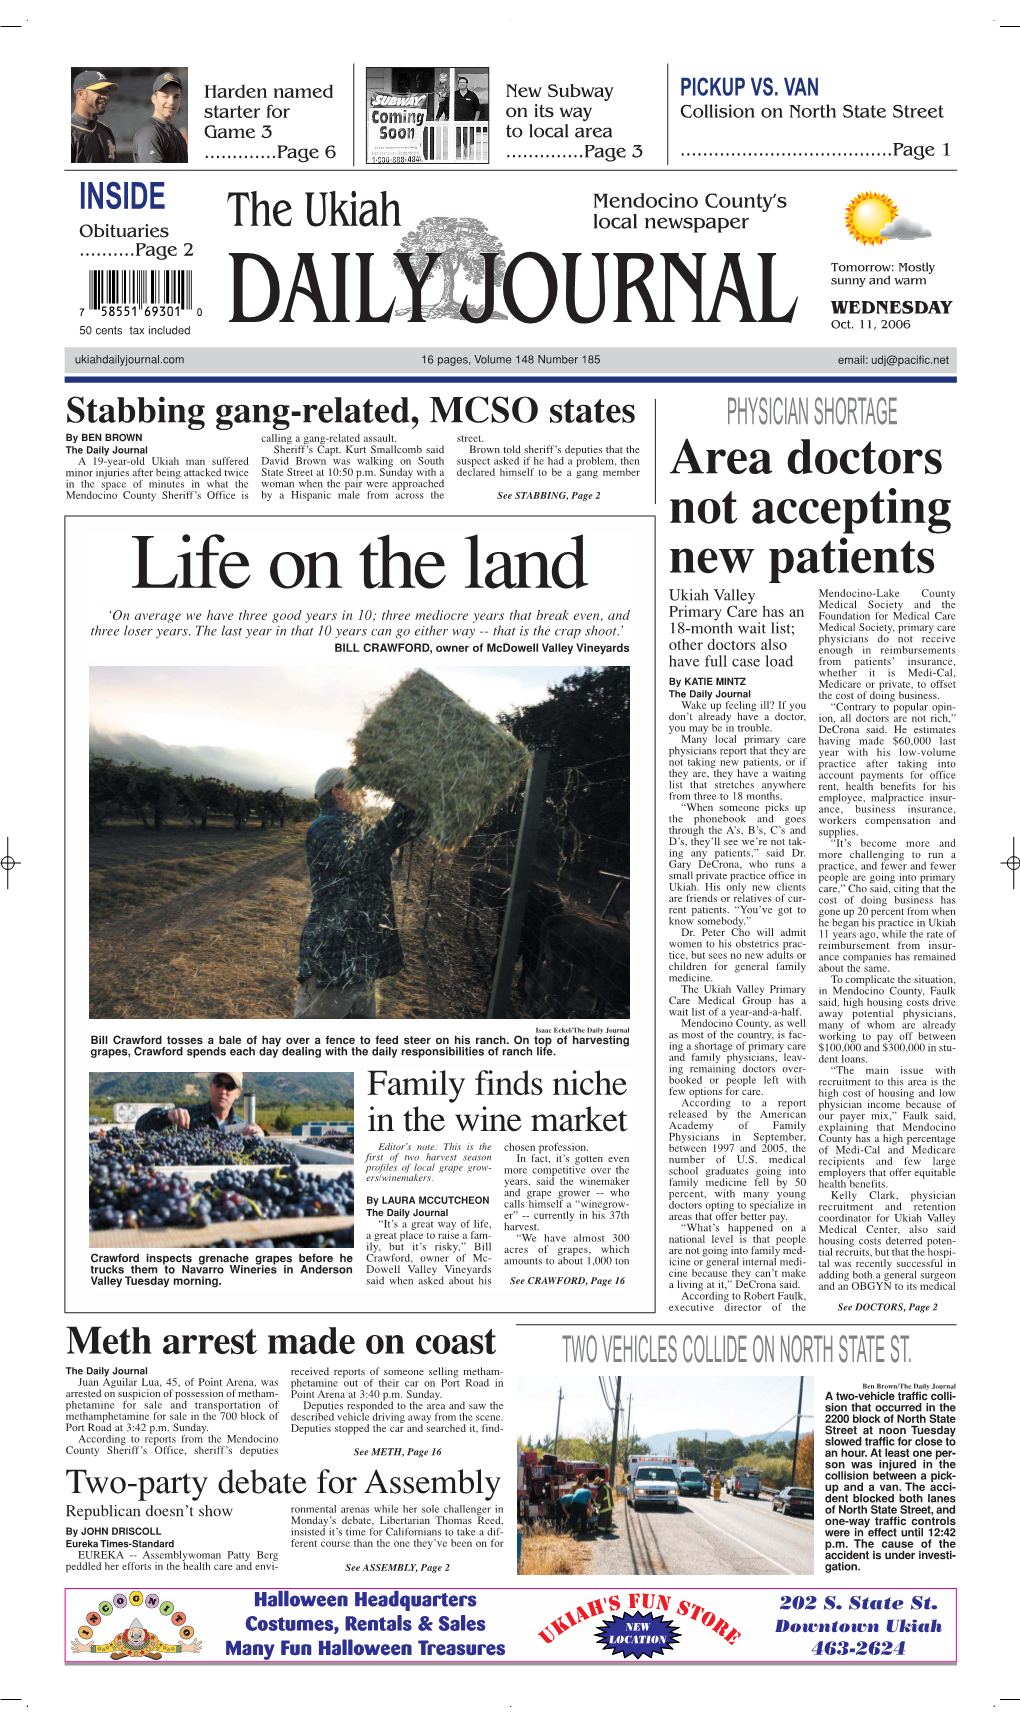 Area Doctors Not Accepting New Patients